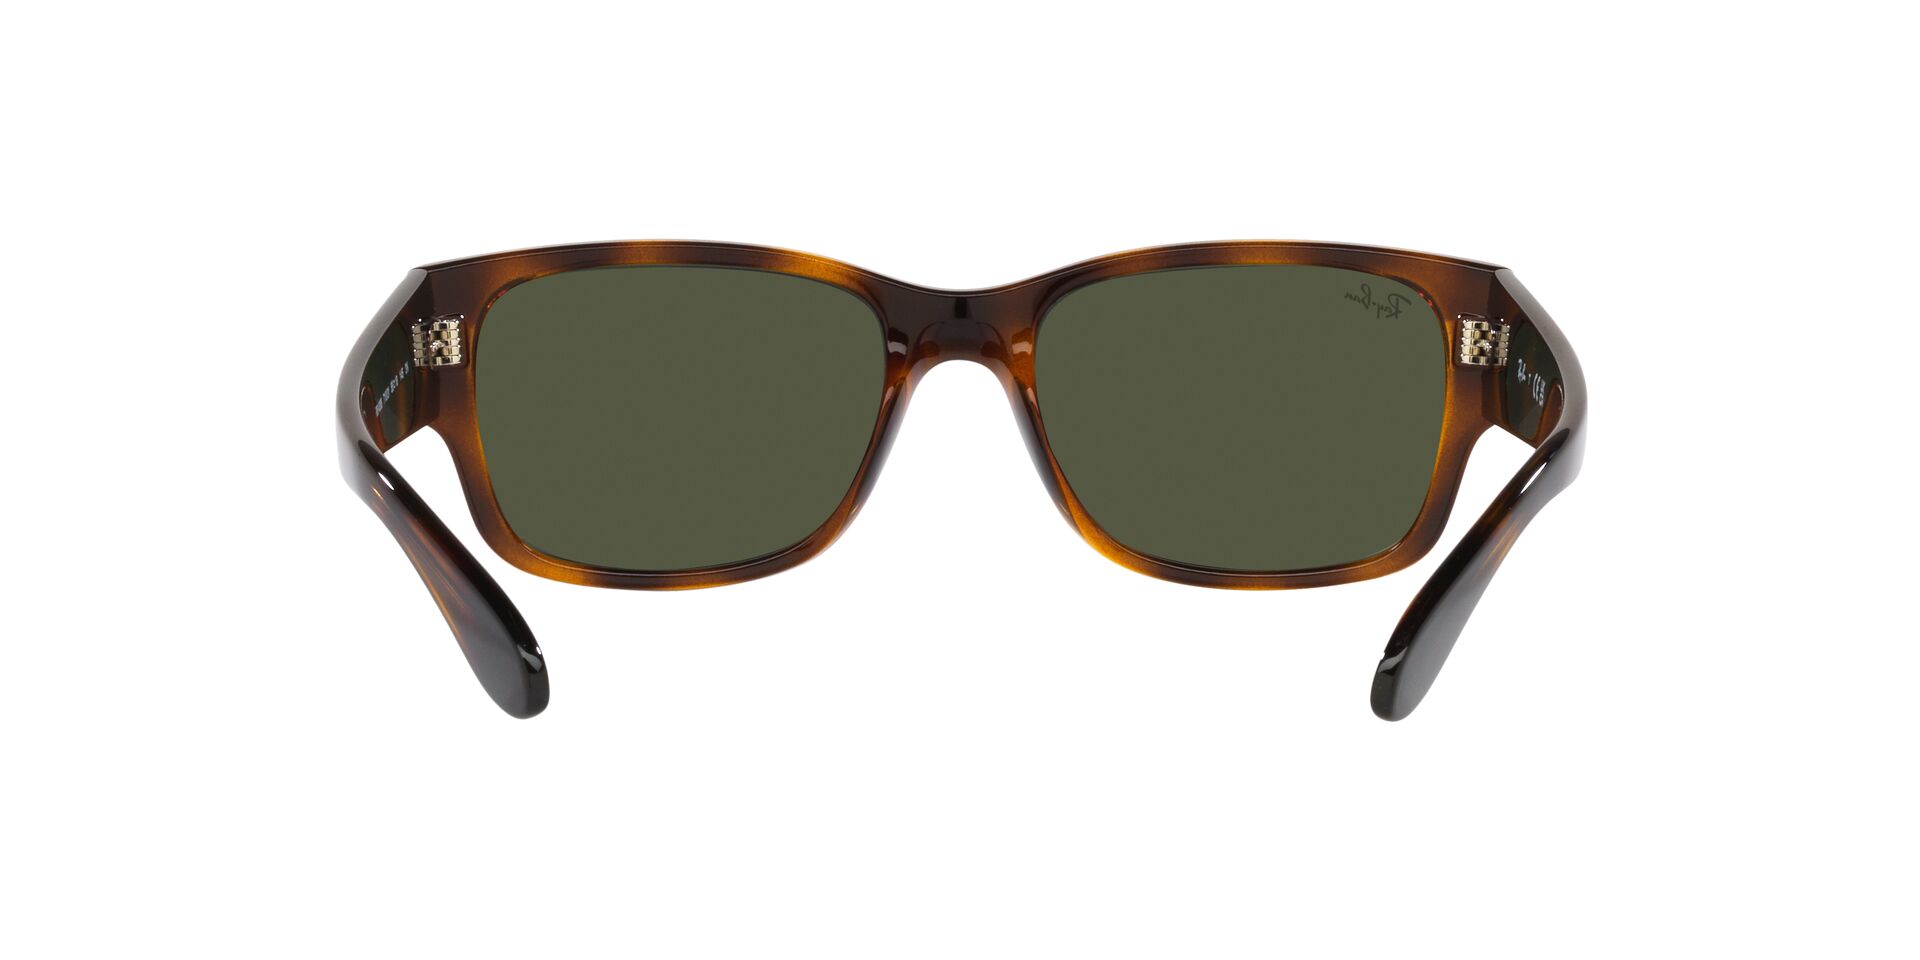 Buy Core Sunglasses Online at Ray-Ban